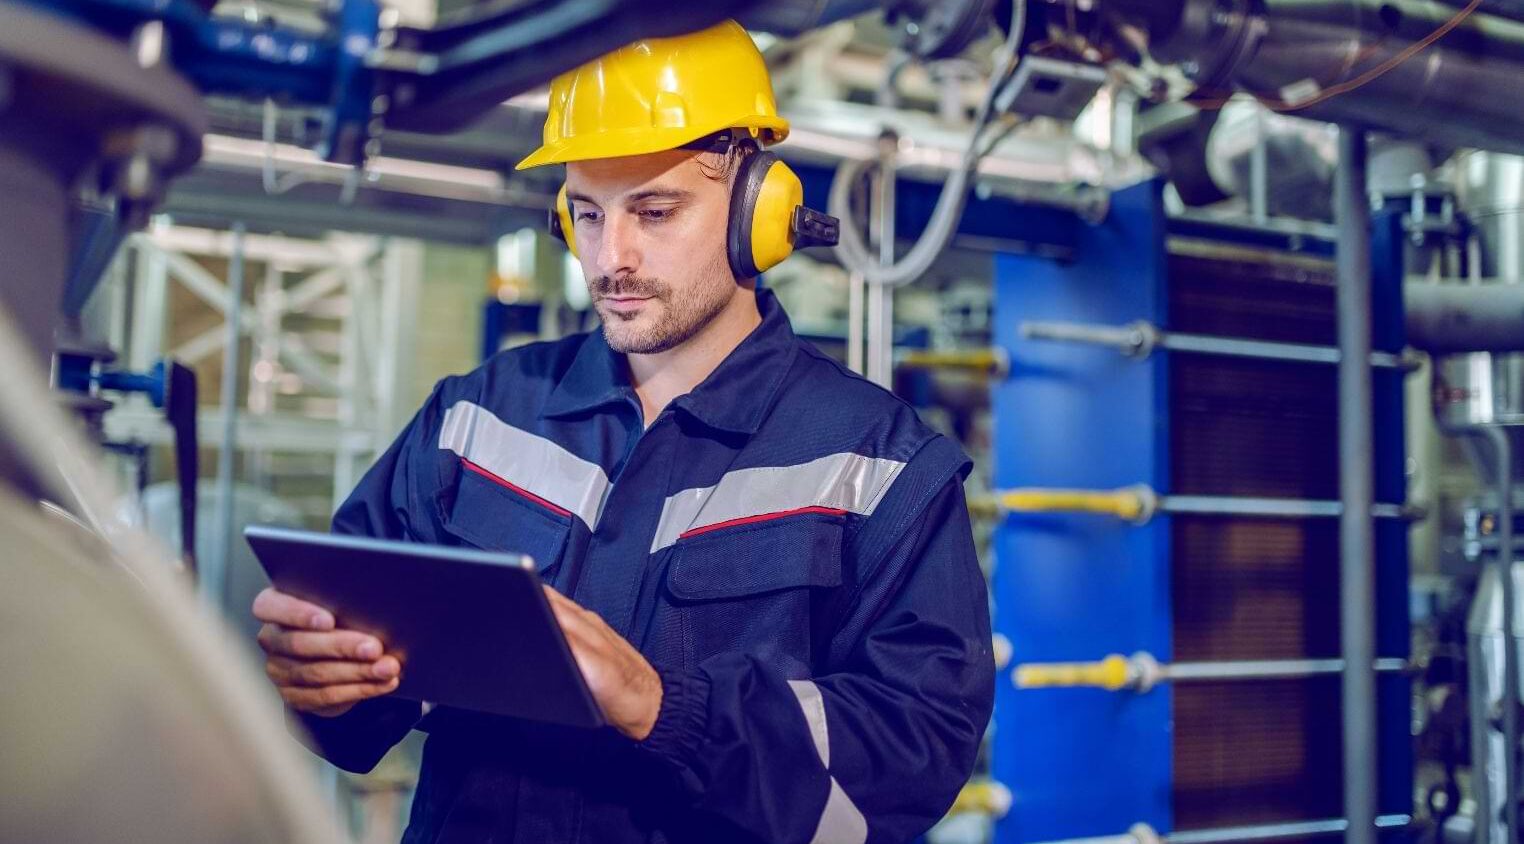 Worker At A Factory Wearing Headphones 1 Aspect Ratio 1472 816